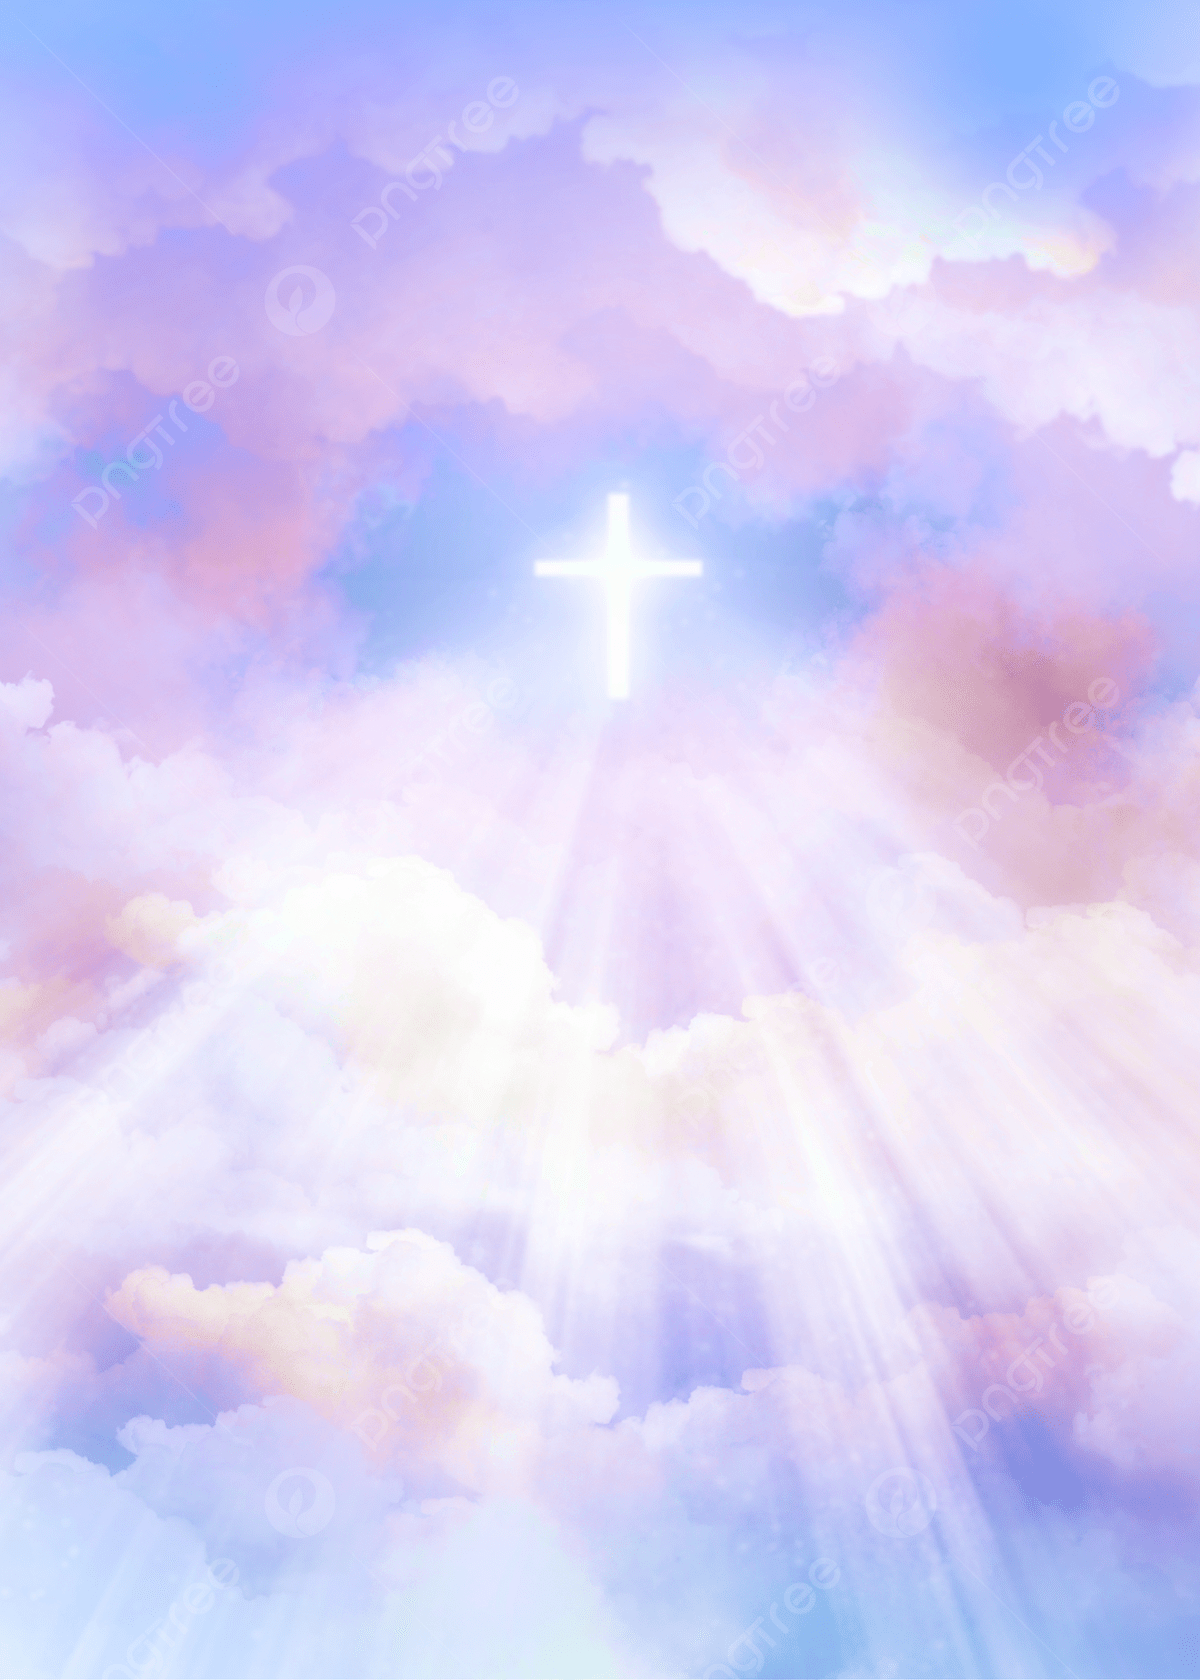 Cross In The Colorful Clouds On Heaven Background Wallpaper Image For Free Download